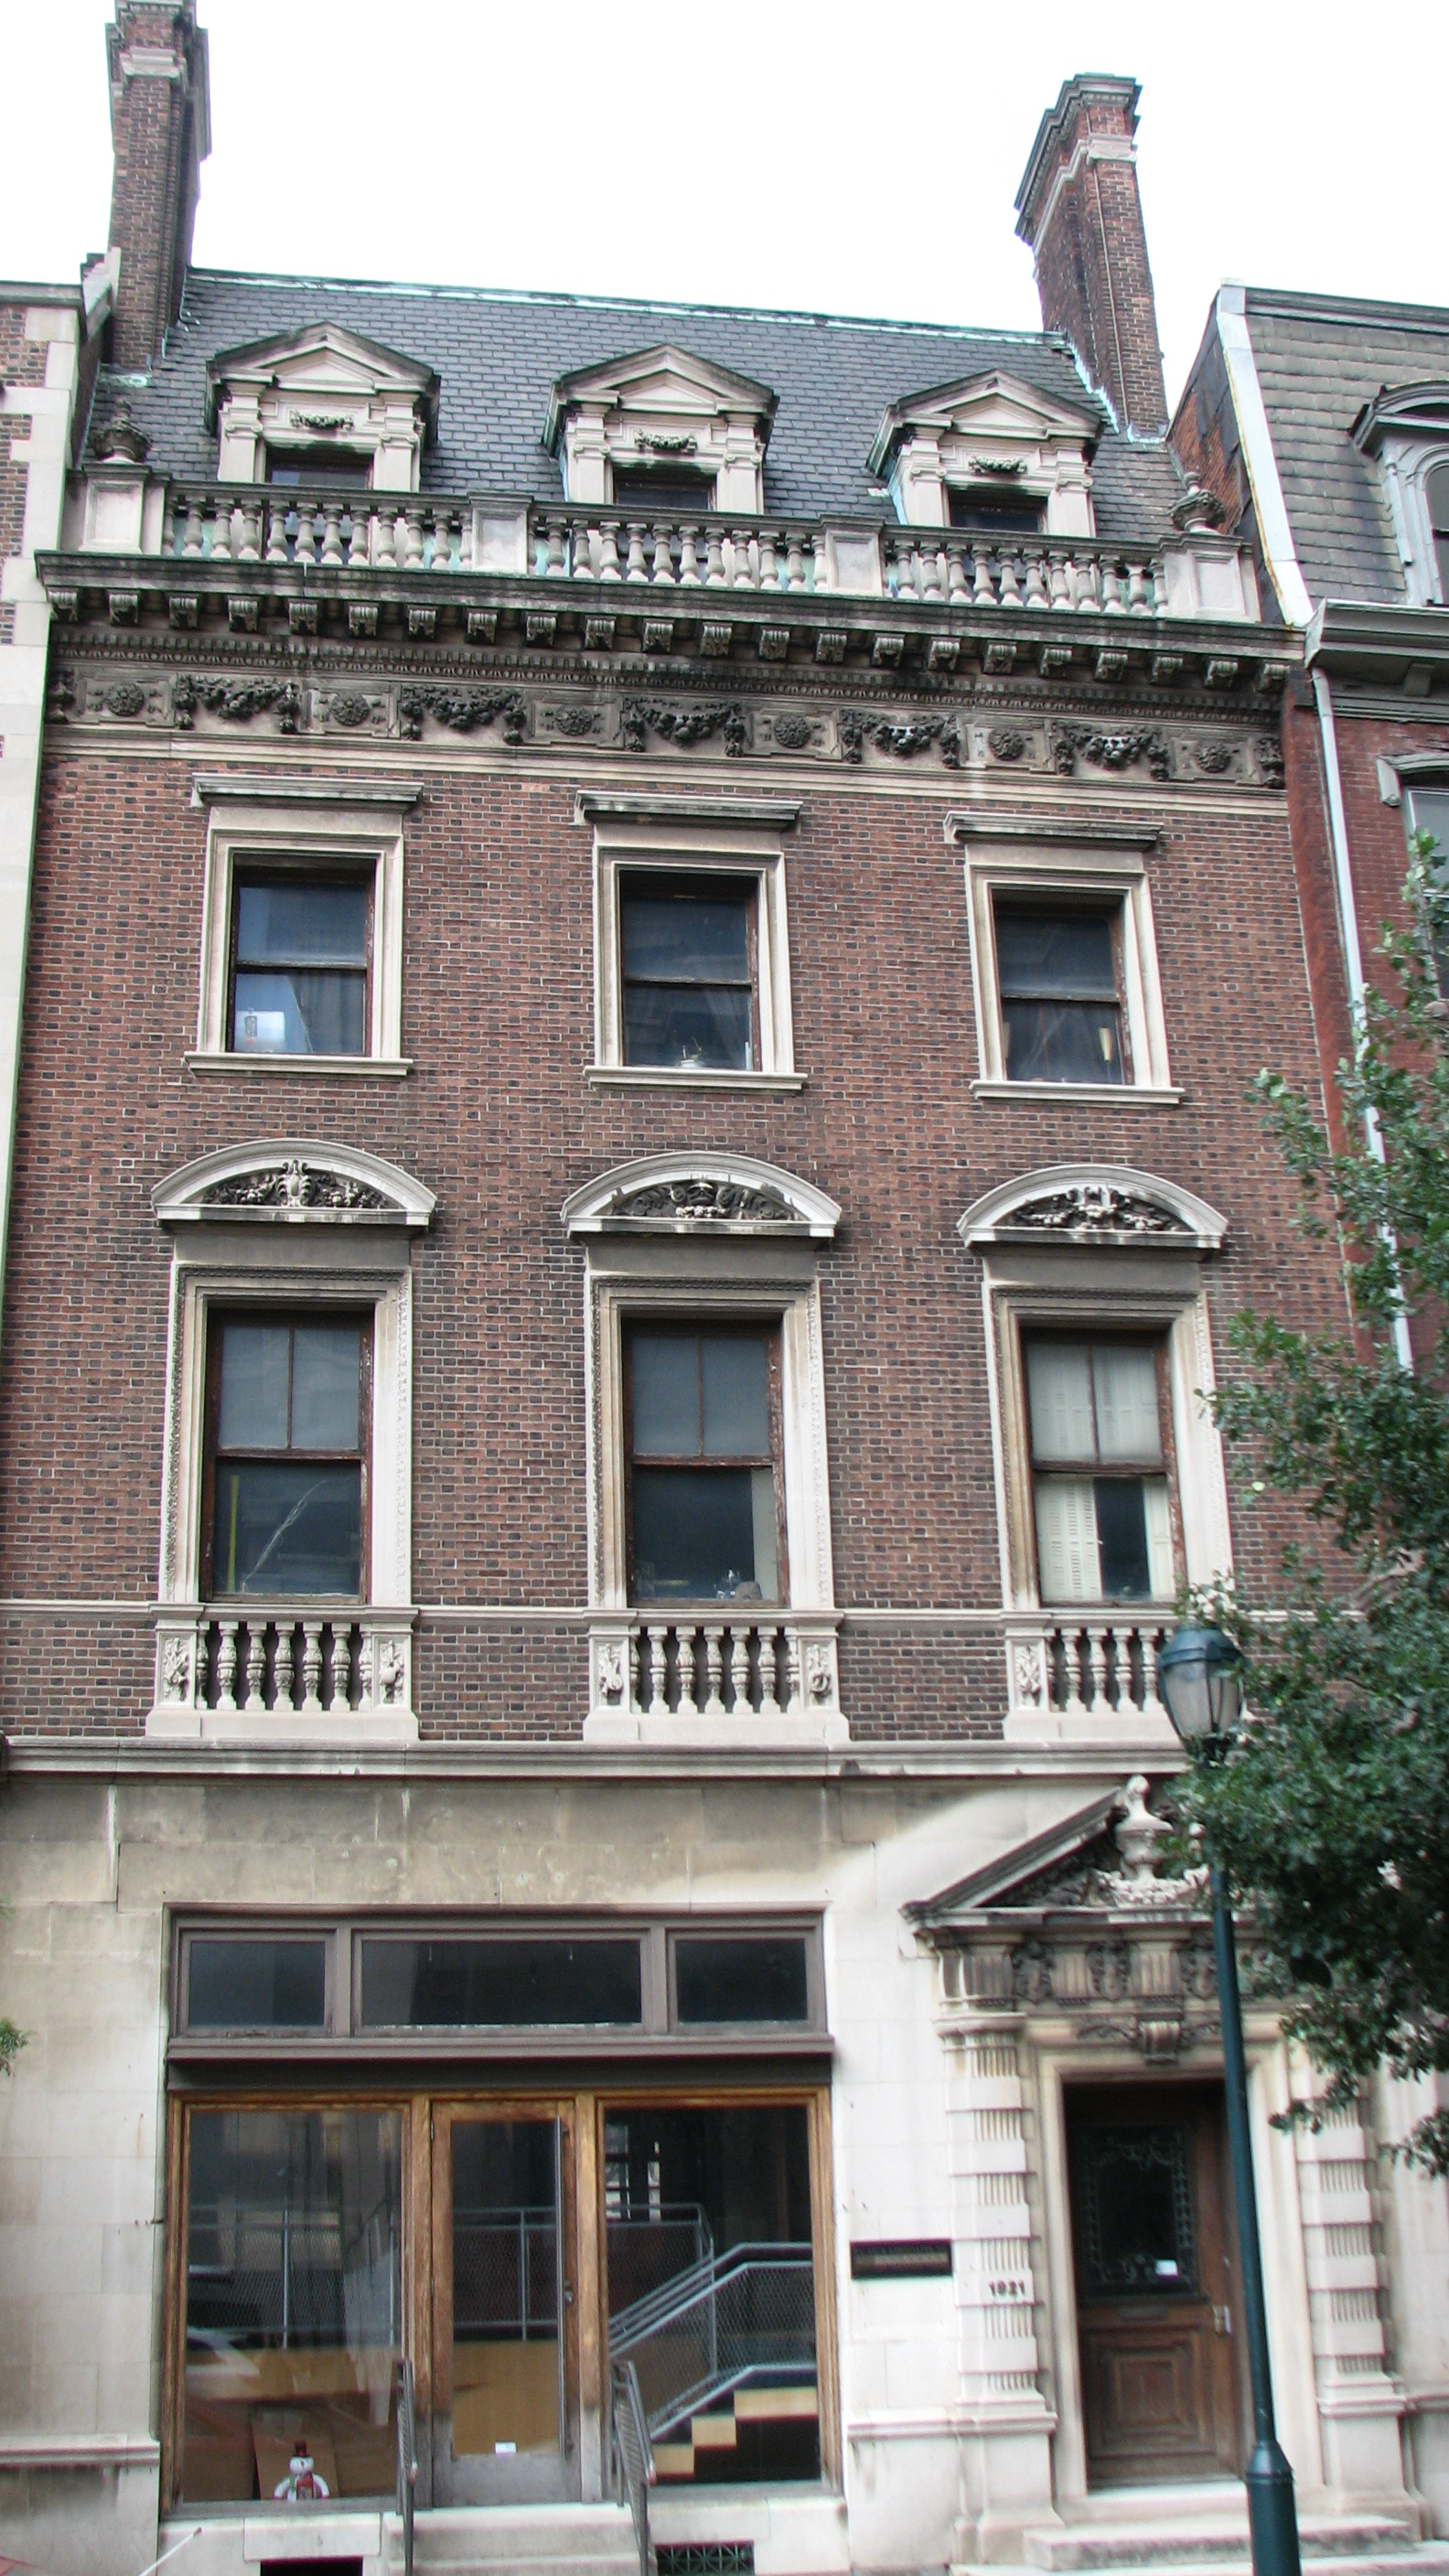 The building at 1921 Walnut was built by the firm of Cope & Stewardson.